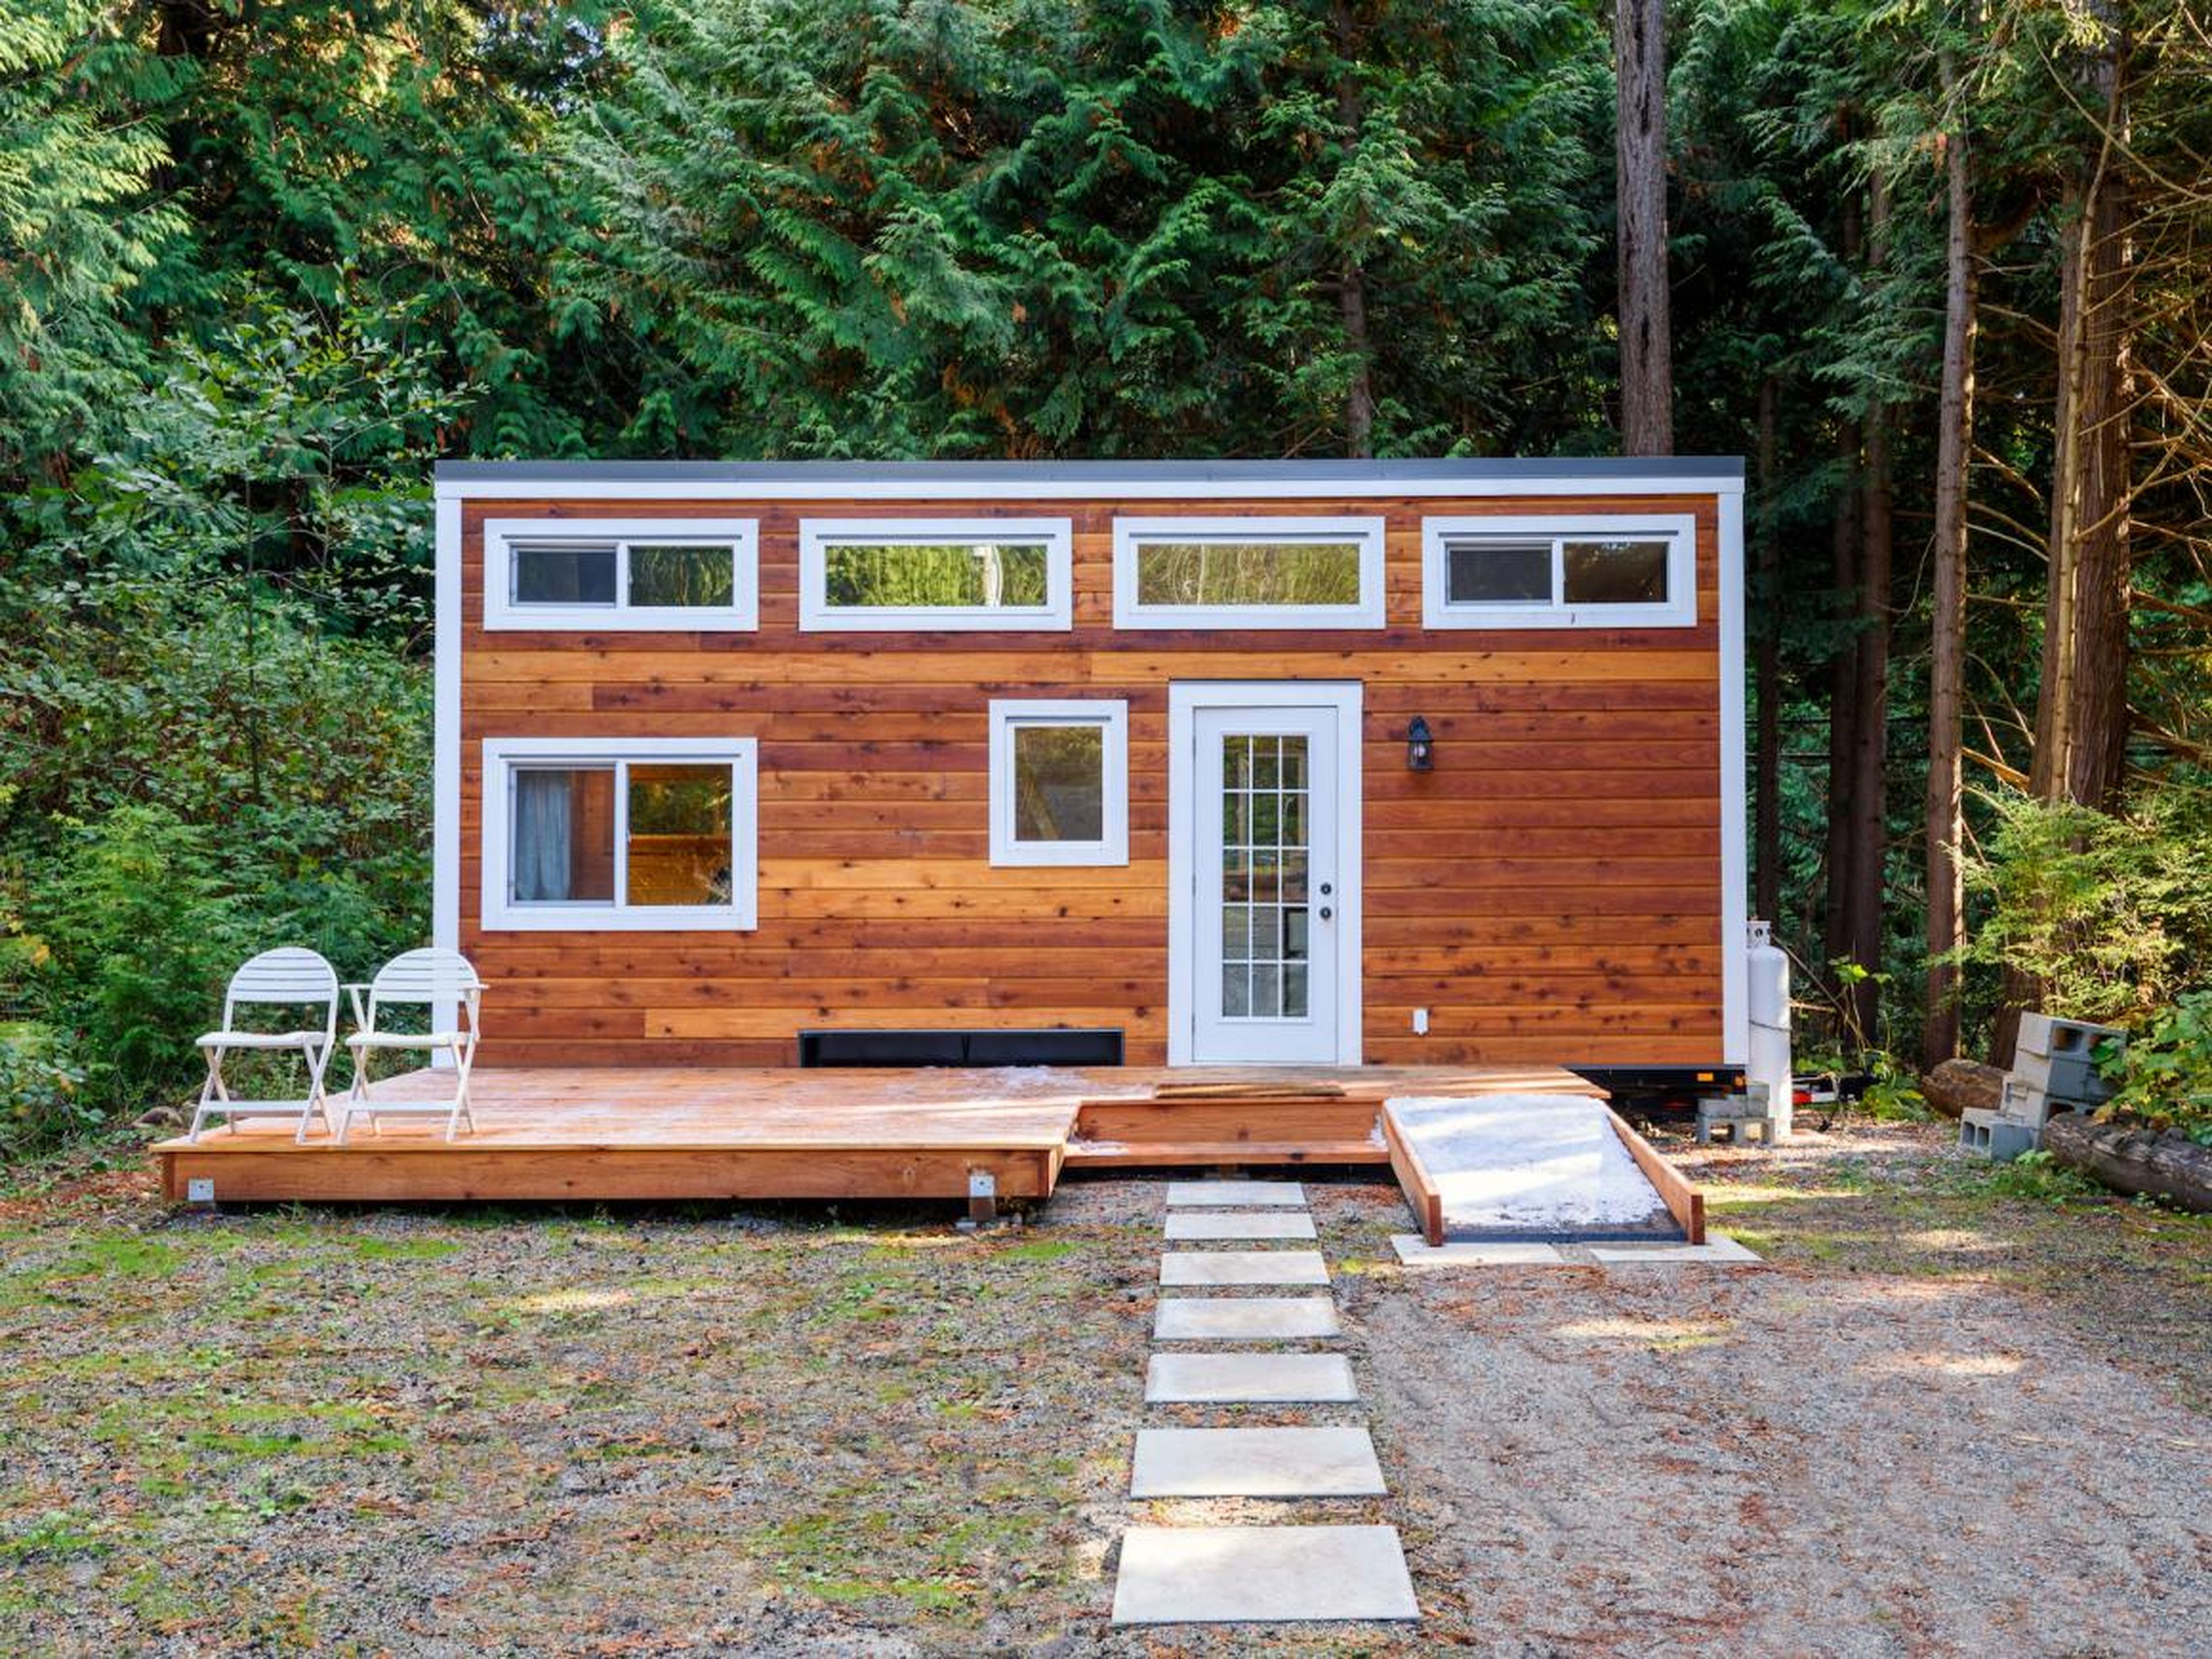 The roots of tiny living date back to the 18th century in the days of Henry David Thoreau and Walden Pond, but tiny houses have been a rising trend in the past five years.